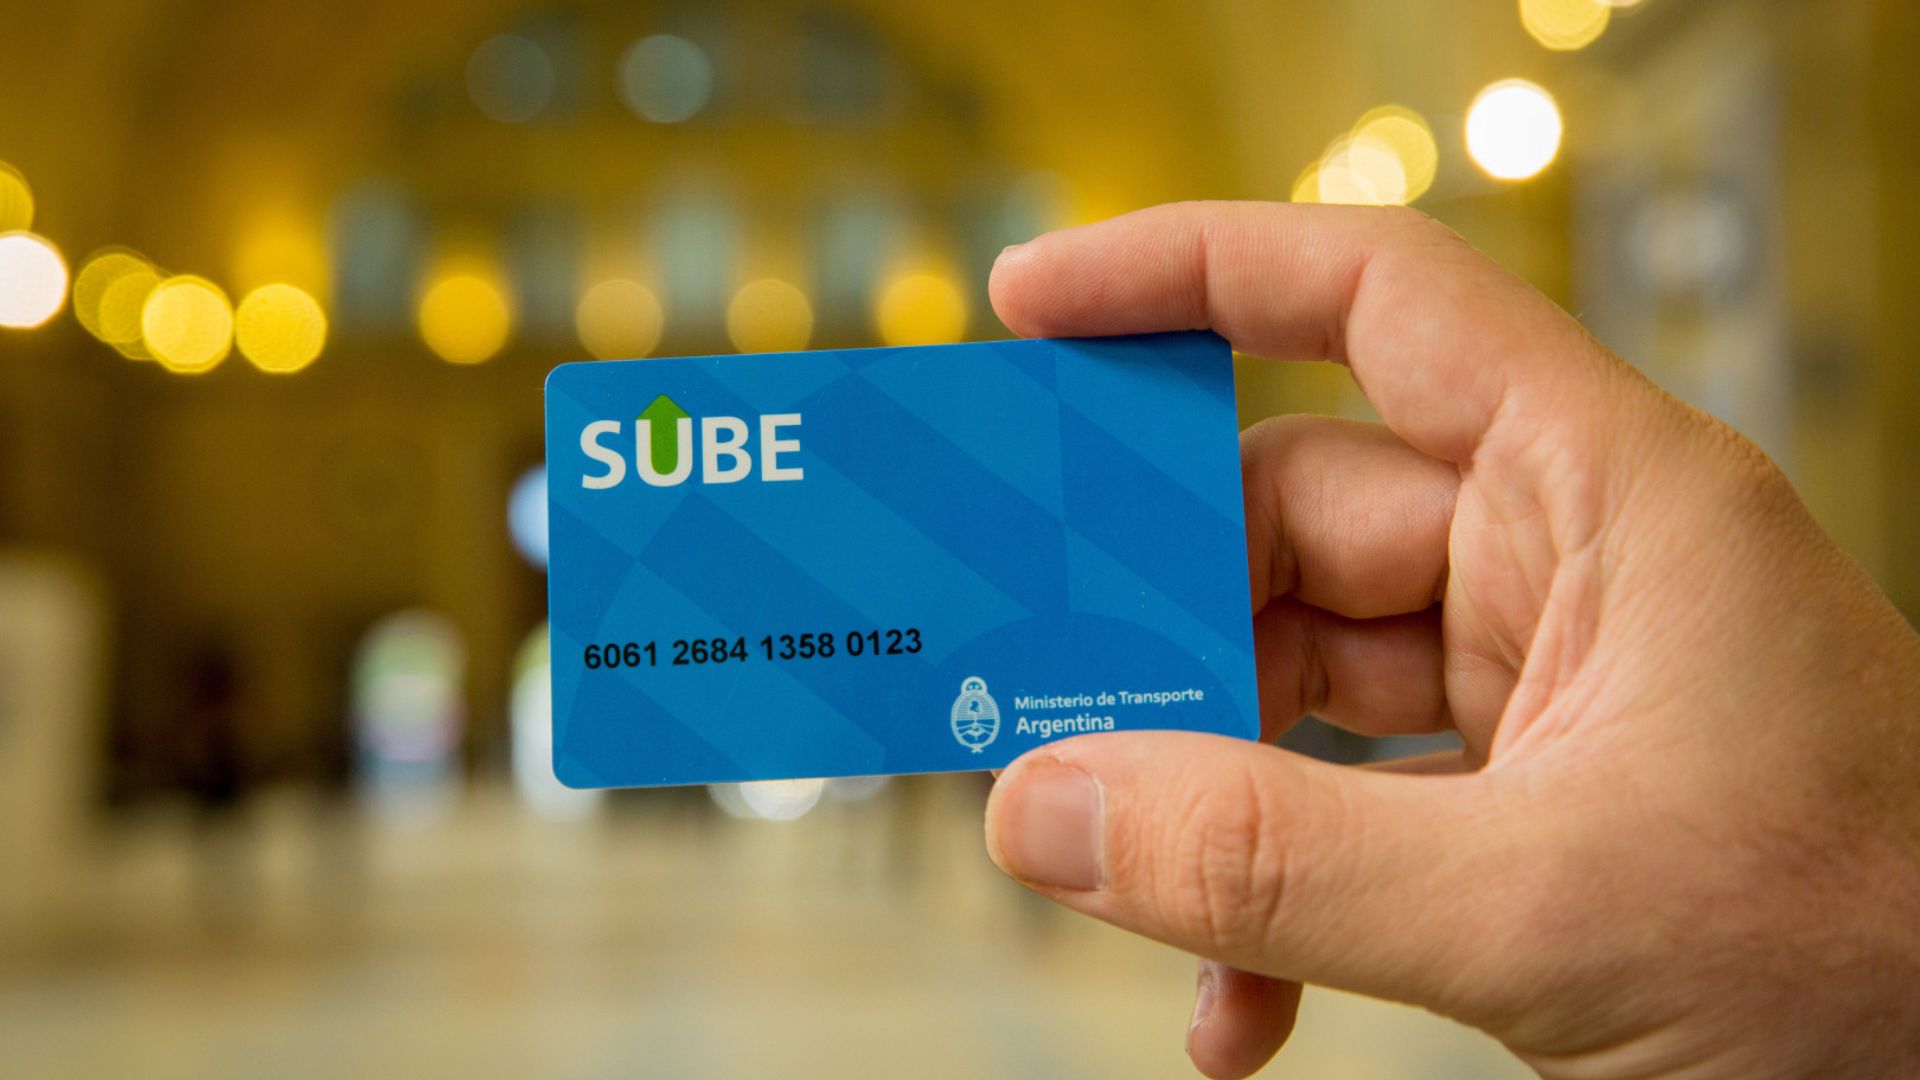 SUBE card registration mandatory to avoid higher bus and train fares